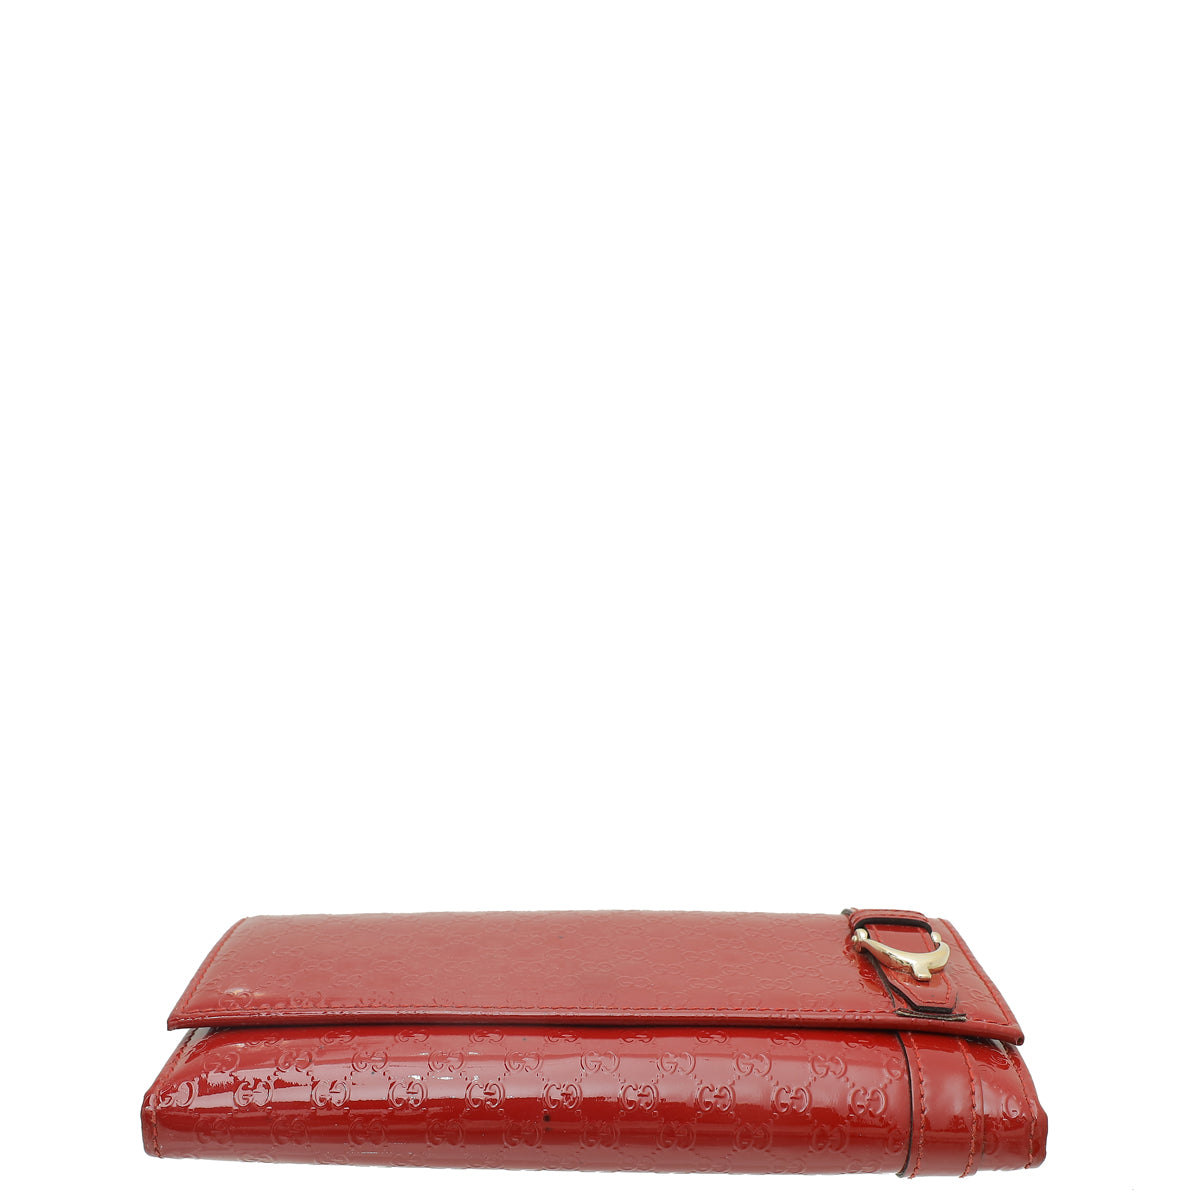 Gucci Red Microguccissima Nice Long Wallet